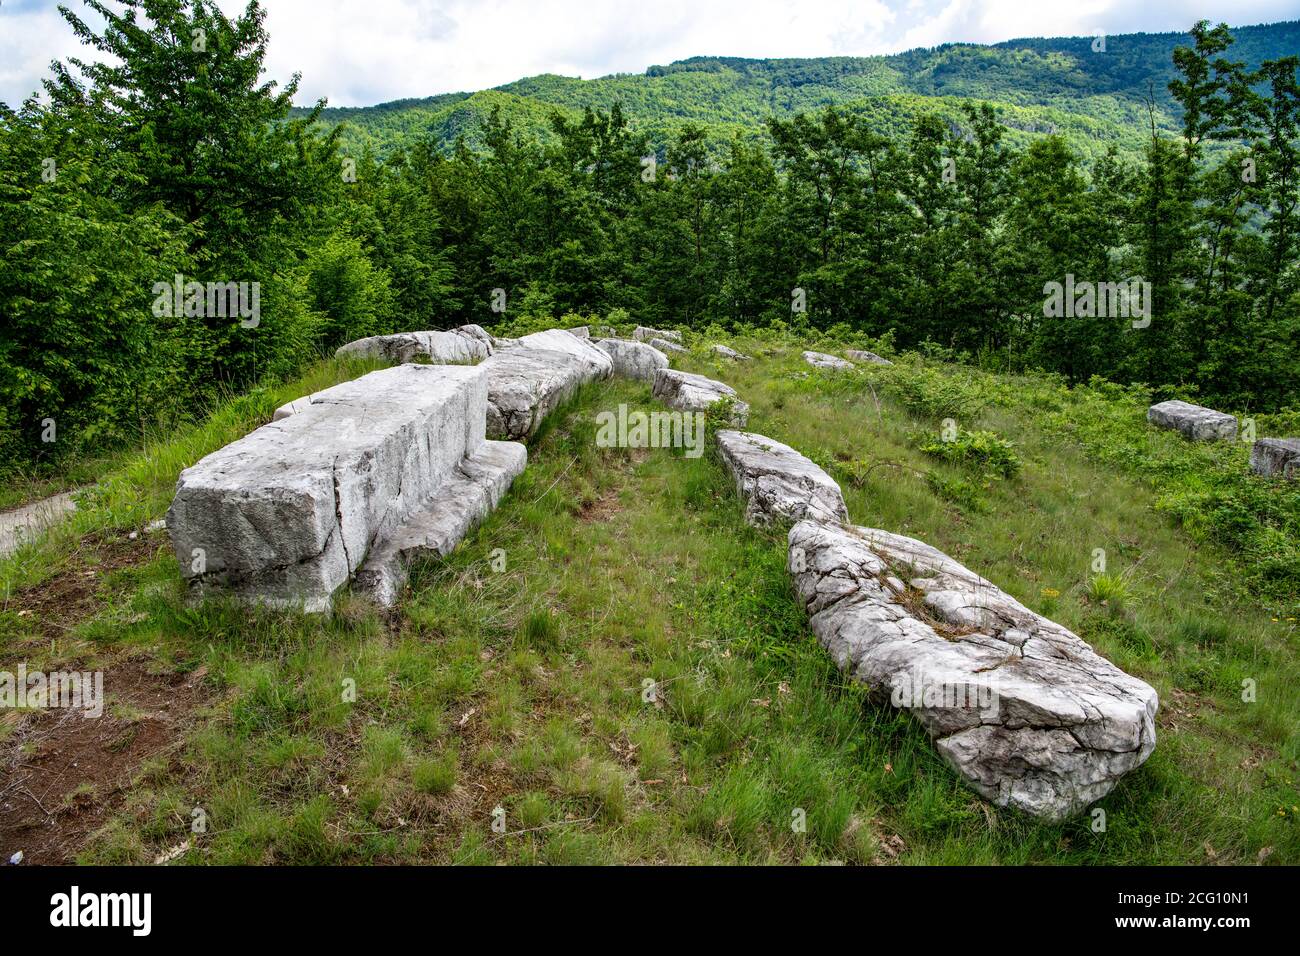 Medieval tombstones from 13Th century called Mramorje or Gajevi, located on Tara mountain near Krizevac village. Necropolis of different shapes. Stock Photo